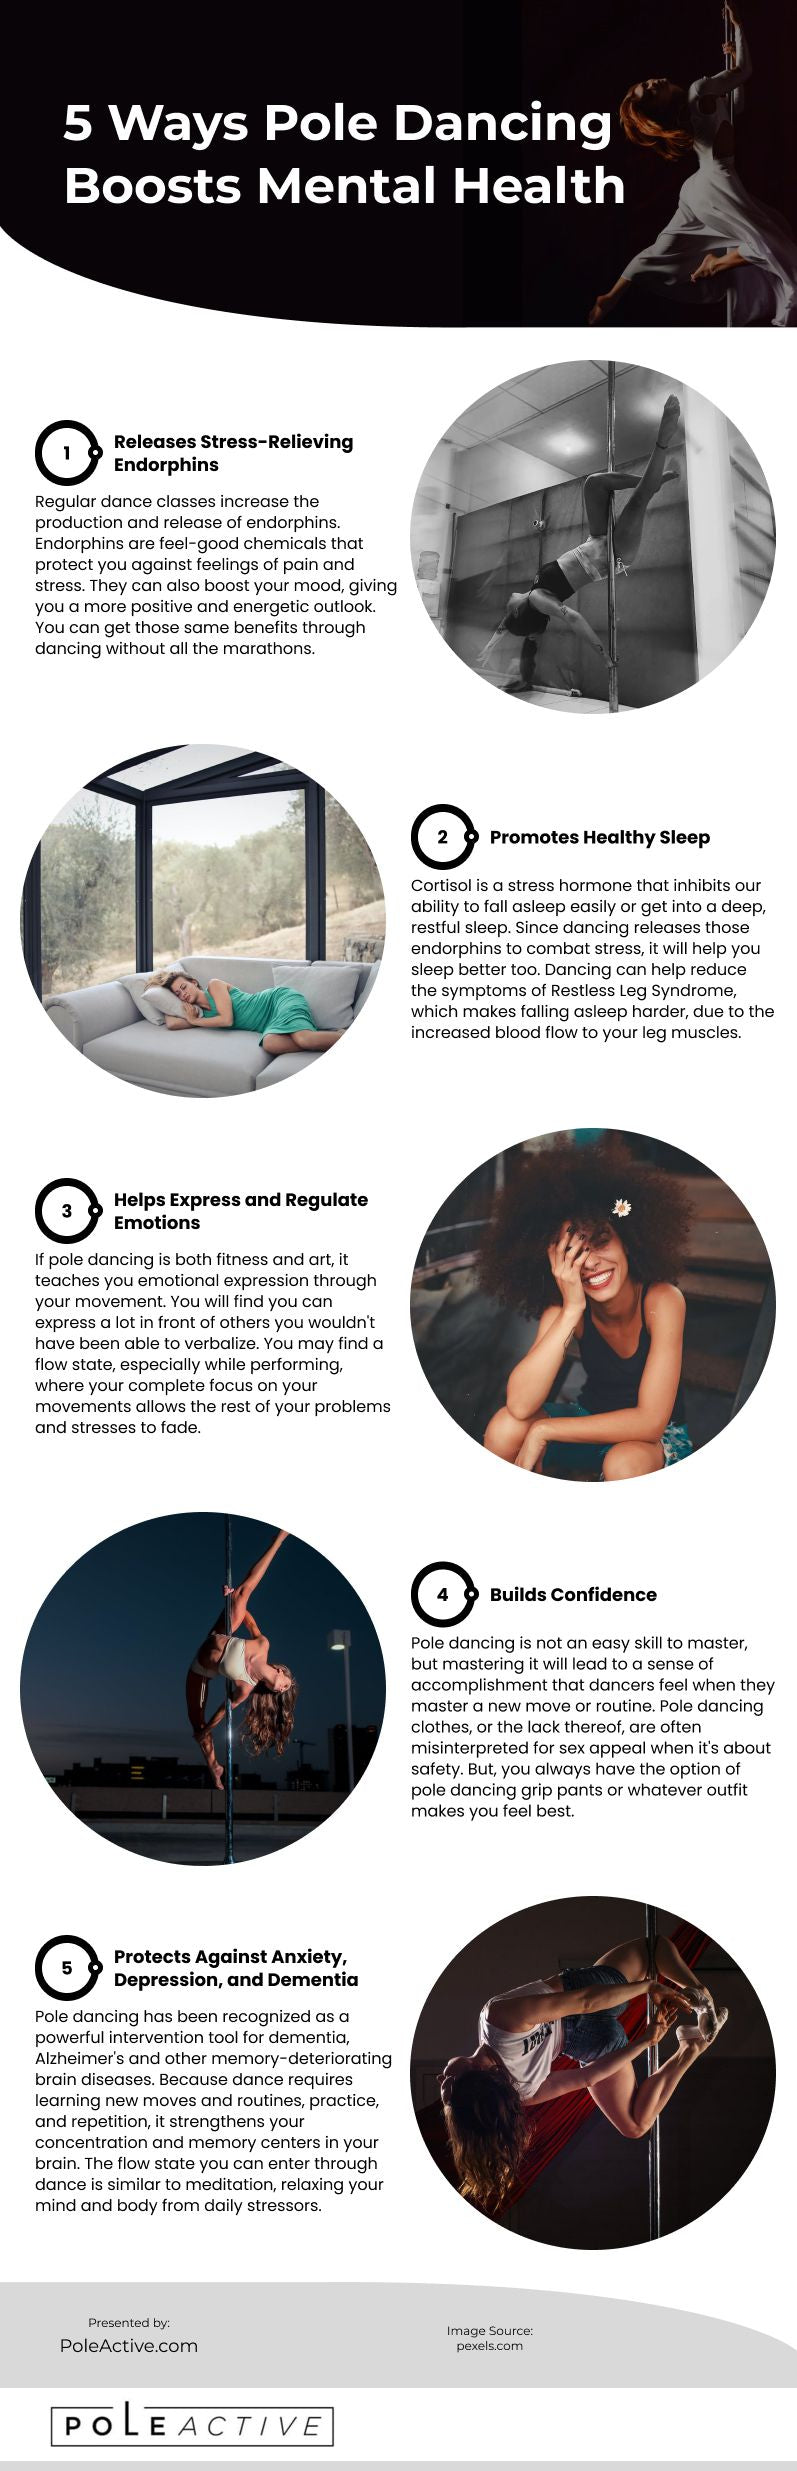 5 Ways Pole Dancing Boosts Mental Health Infographic